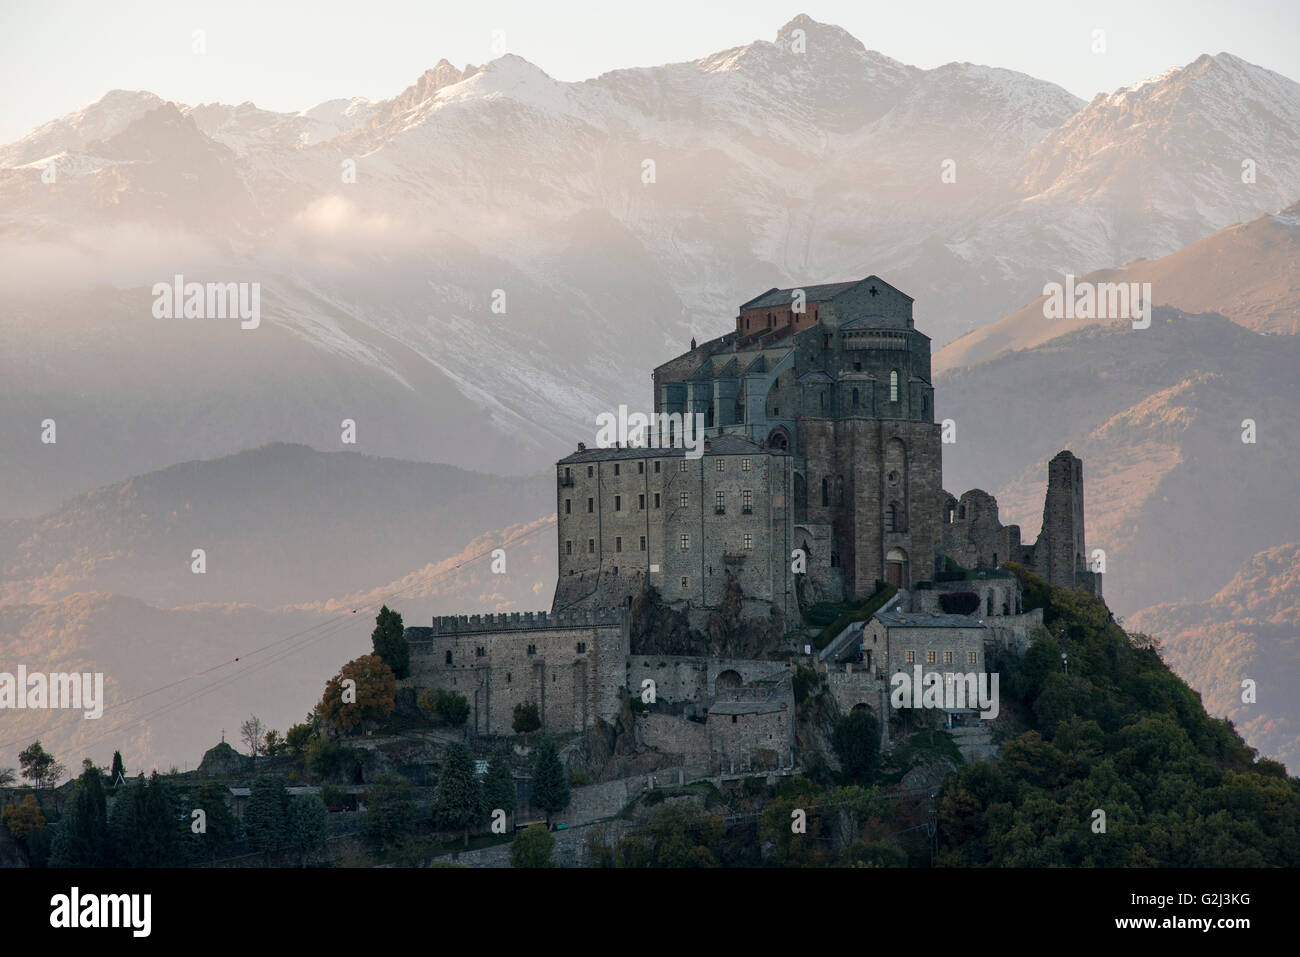 Sacra di San Michele at Sunset with Alps in Background, Italy Stock Photo